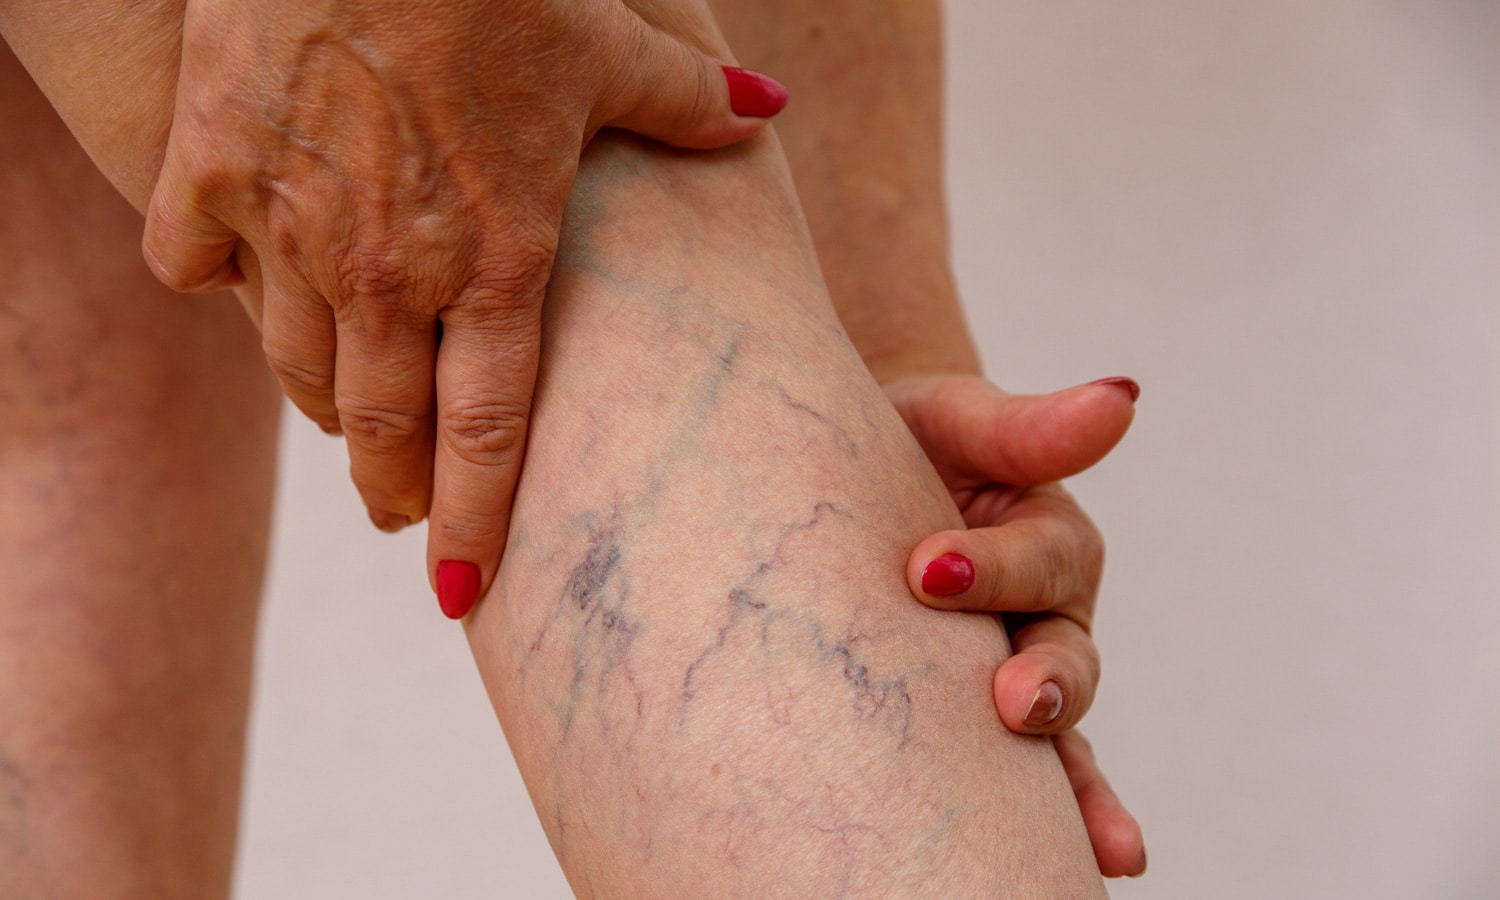 Here's What We Know About CBD's Effects On Varicose Veins